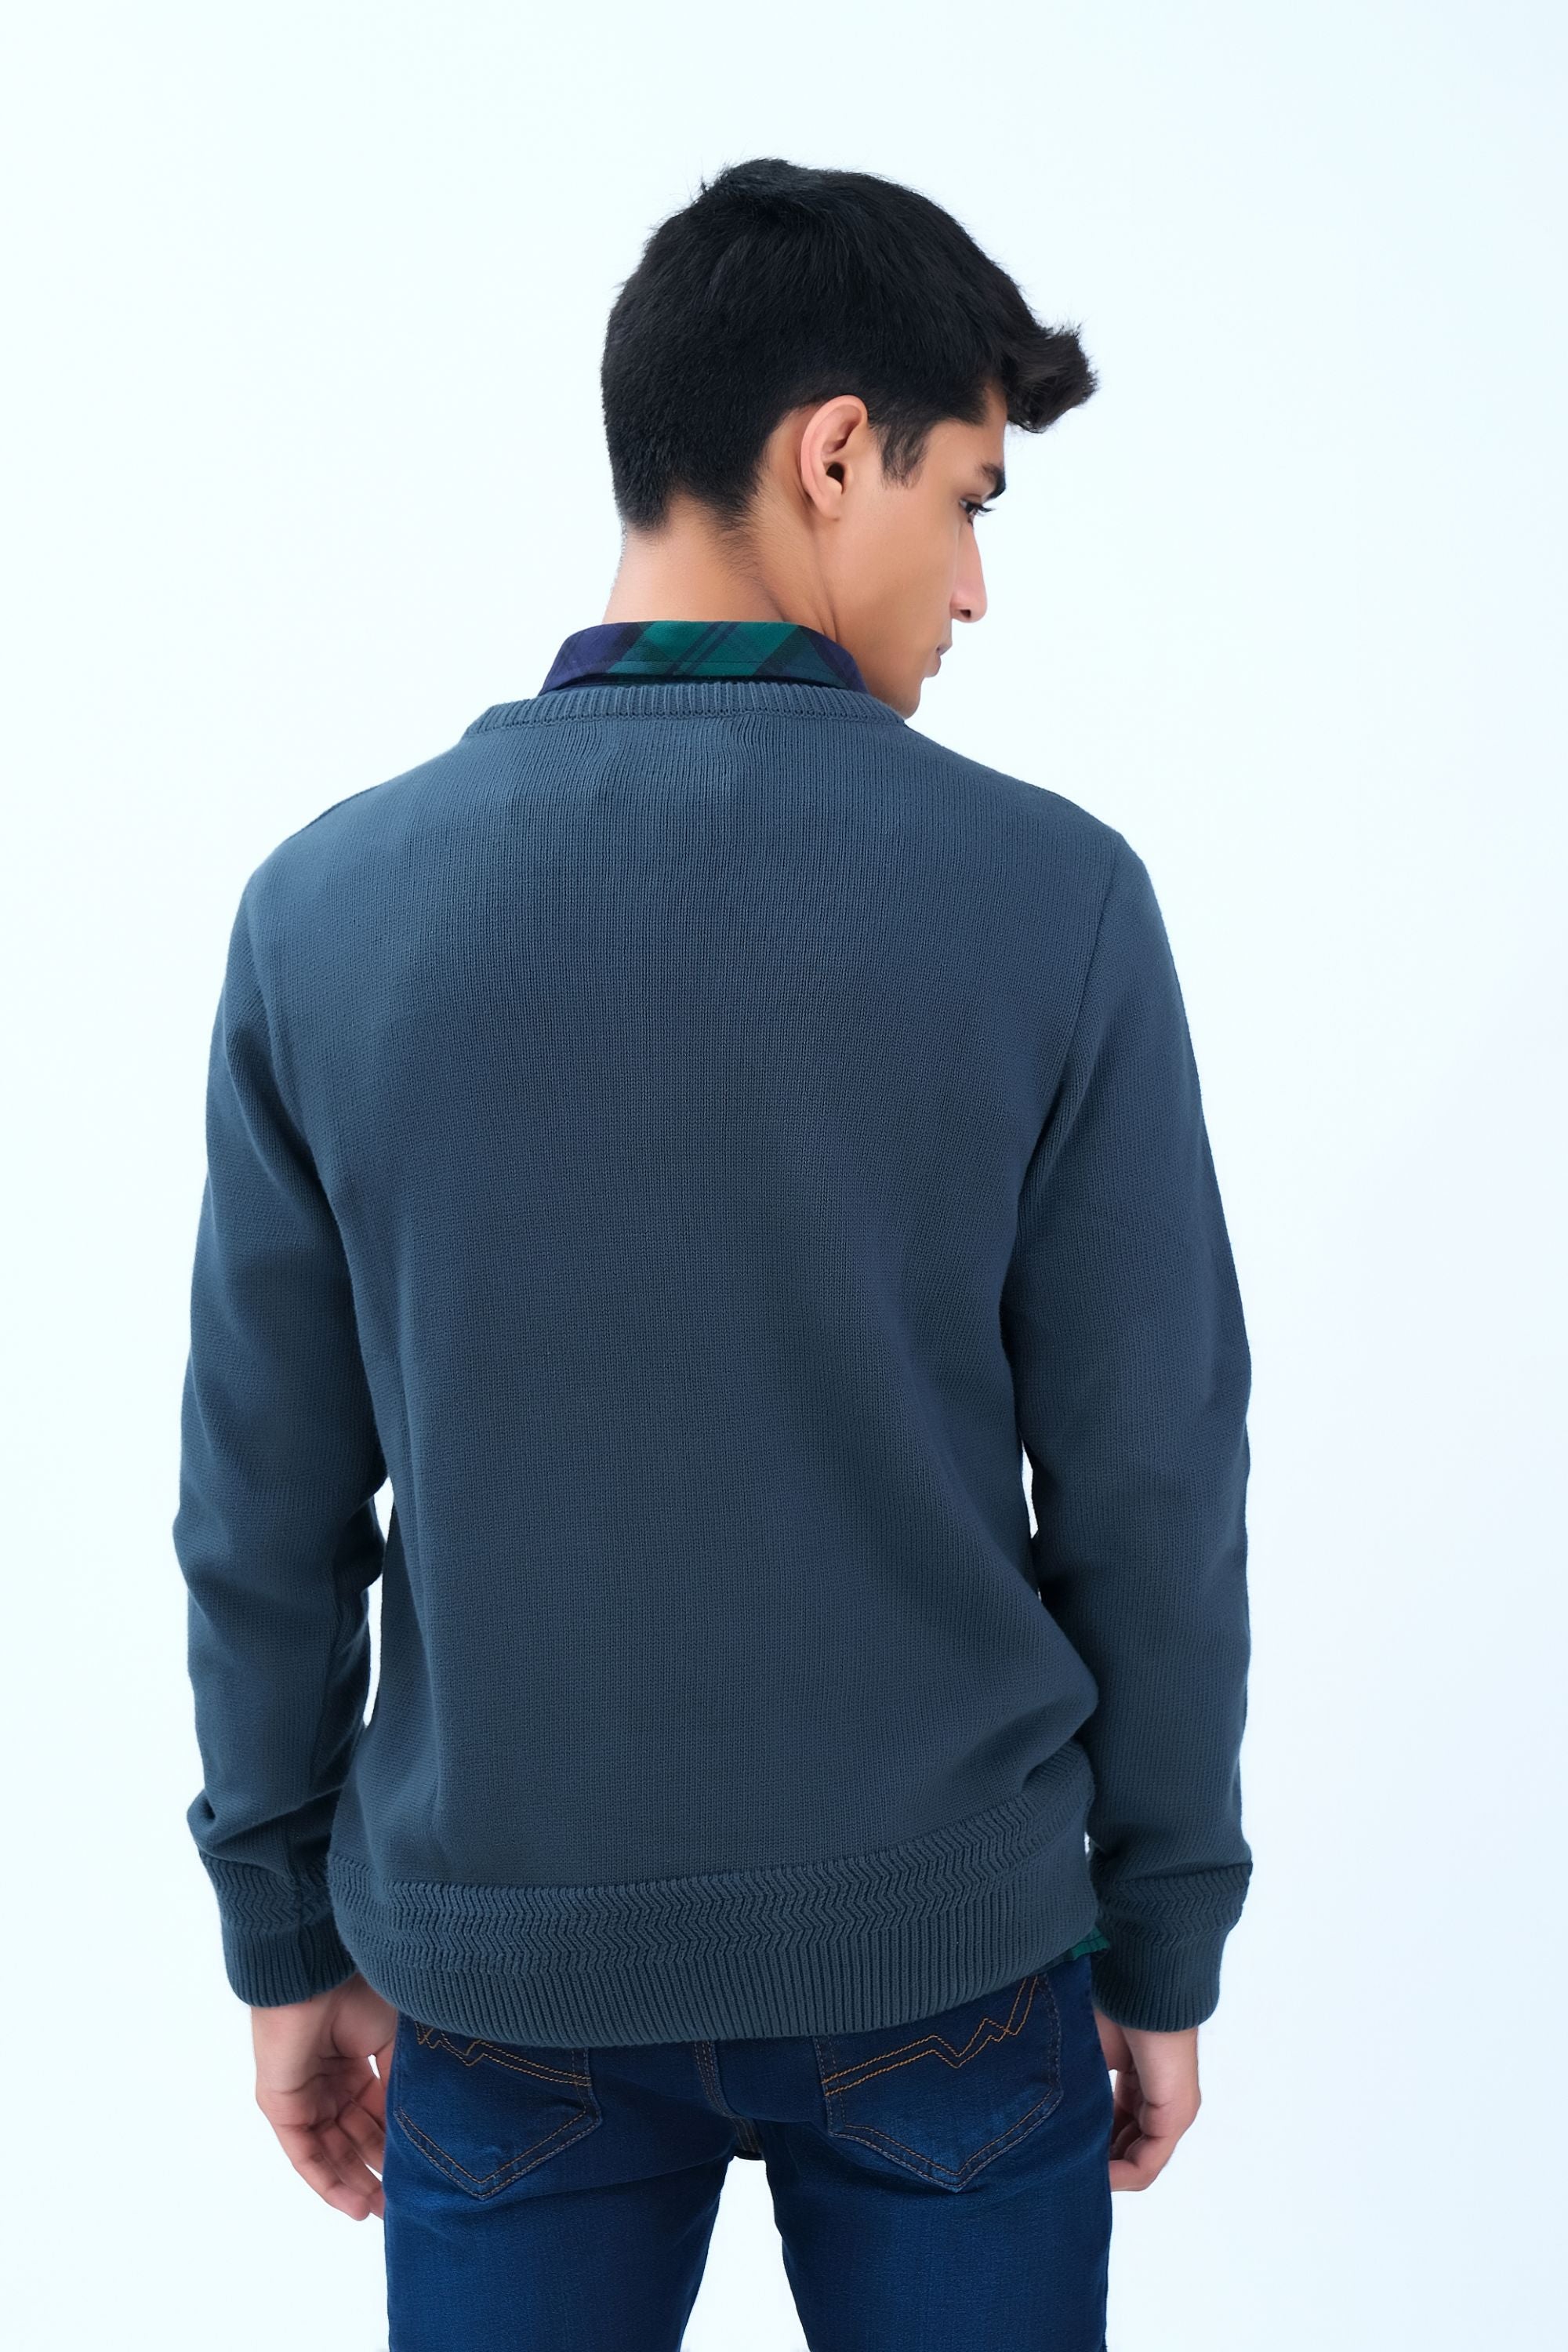 Smart Teal Sweater